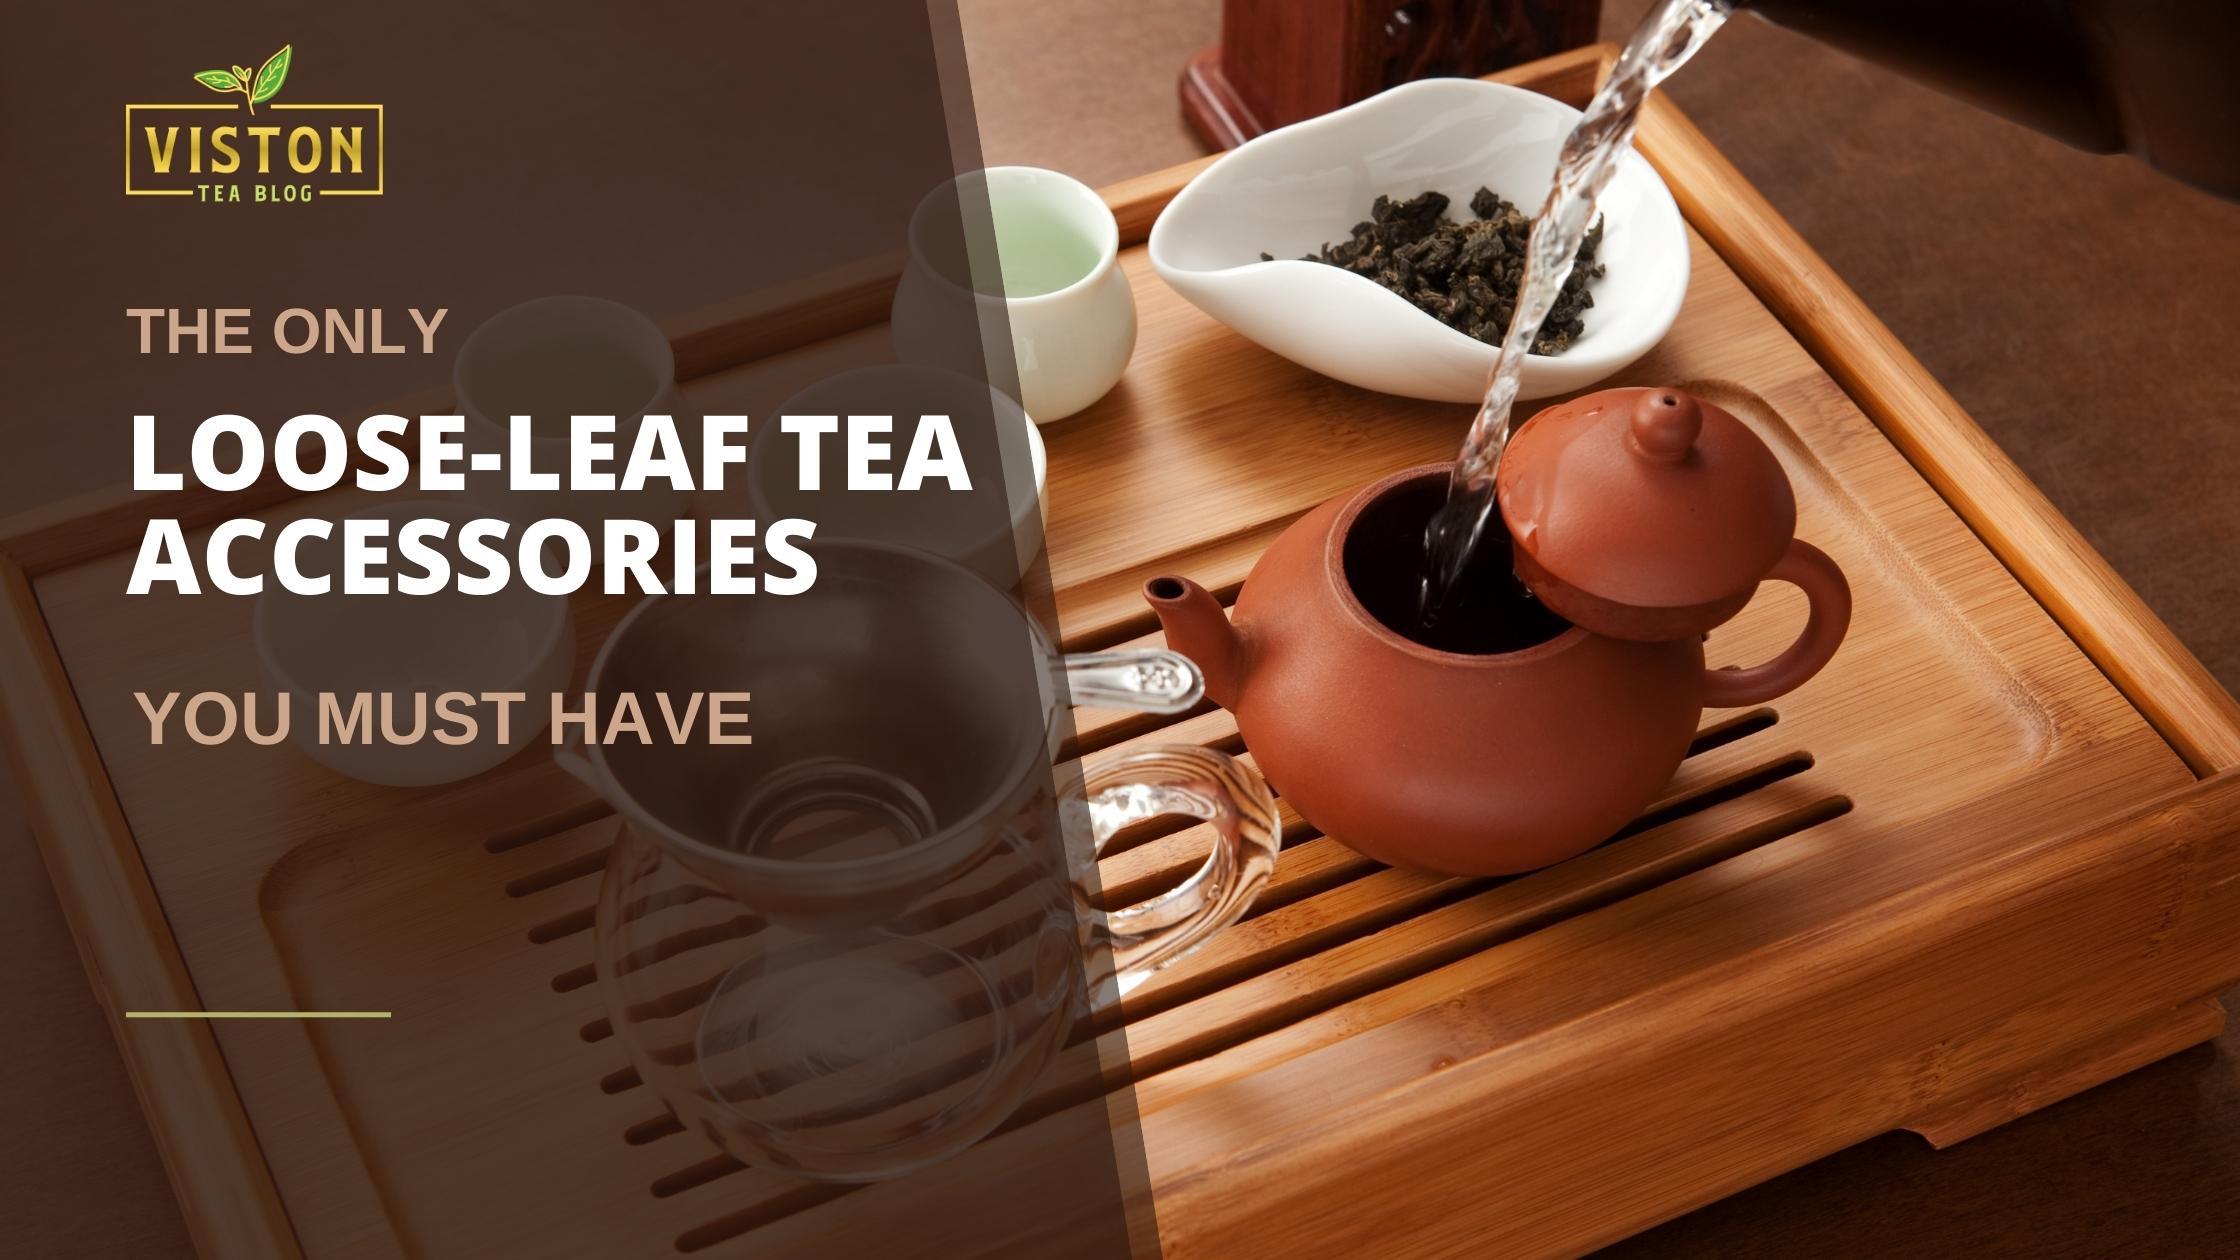 https://blog.vistontea.com/wp-content/uploads/2022/05/loose-leaf-tea-accessories-and-how-to-use-them-article-featured-image.jpg